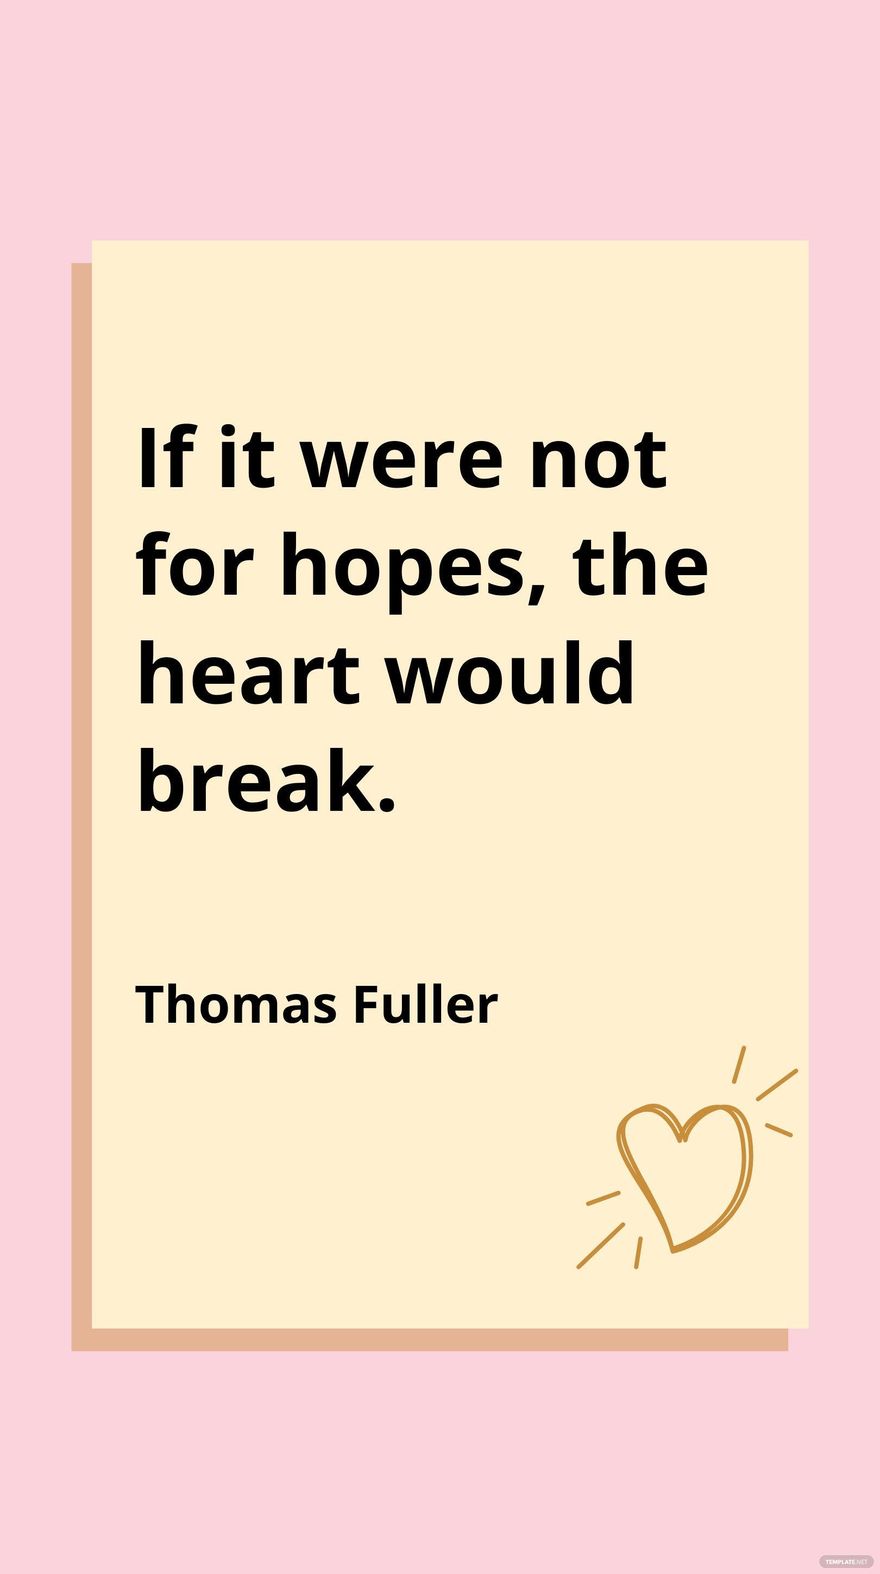 Free Thomas Fuller - If it were not for hopes, the heart would break.